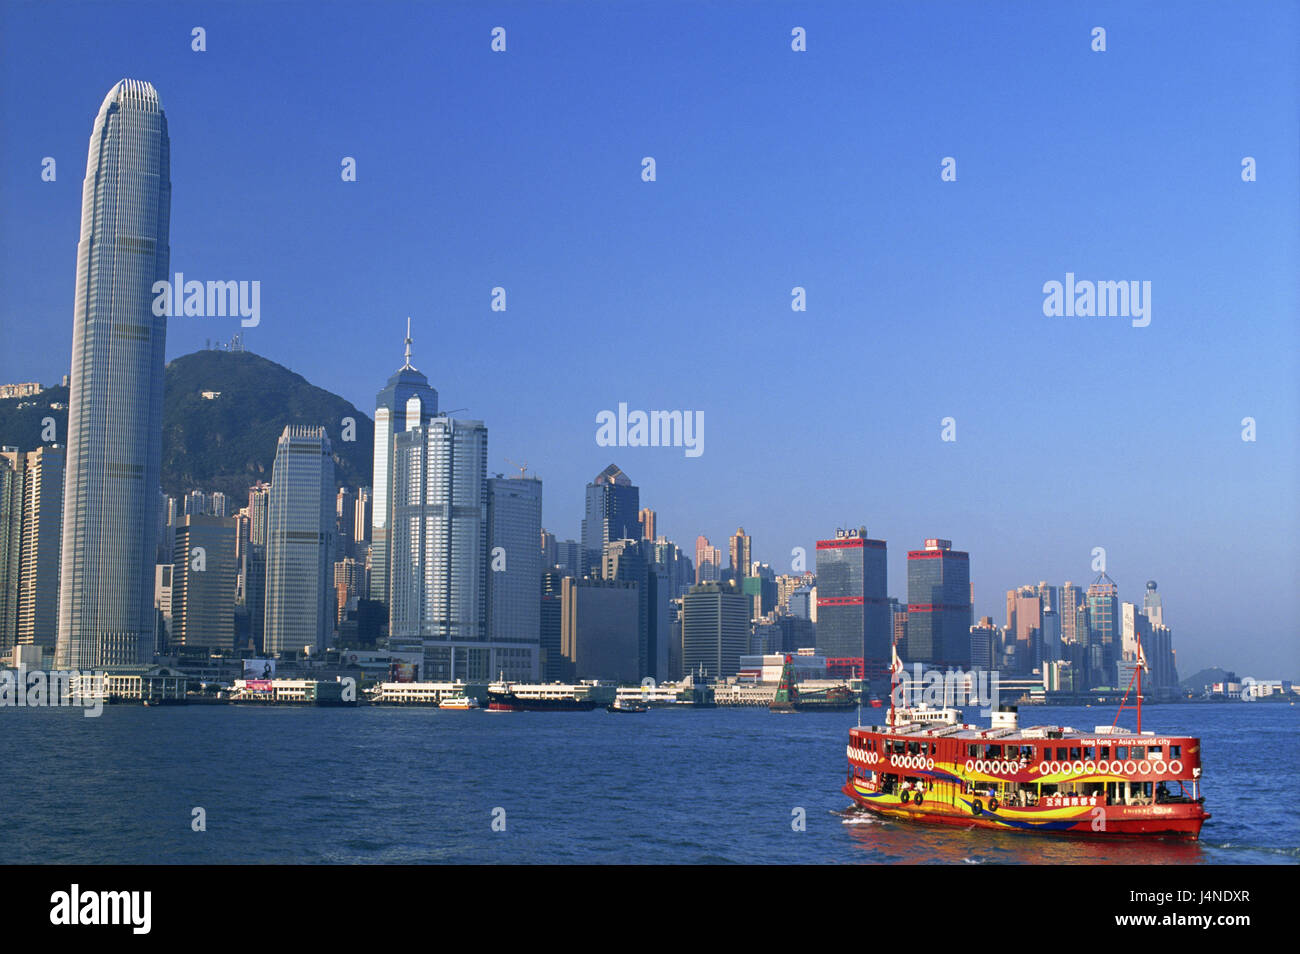 China, Hong Kong, Hong Kong Iceland, skyline, Victoria Harbour, ferry, sea, Asia, town, city, cosmopolitan city, metropolis, town view, skyscraper, high rises, architecture, harbour, navigation, ferryboat, ships, ship traffic, Star-Ferry, means of transportation, personal transport, mountain, Stock Photo